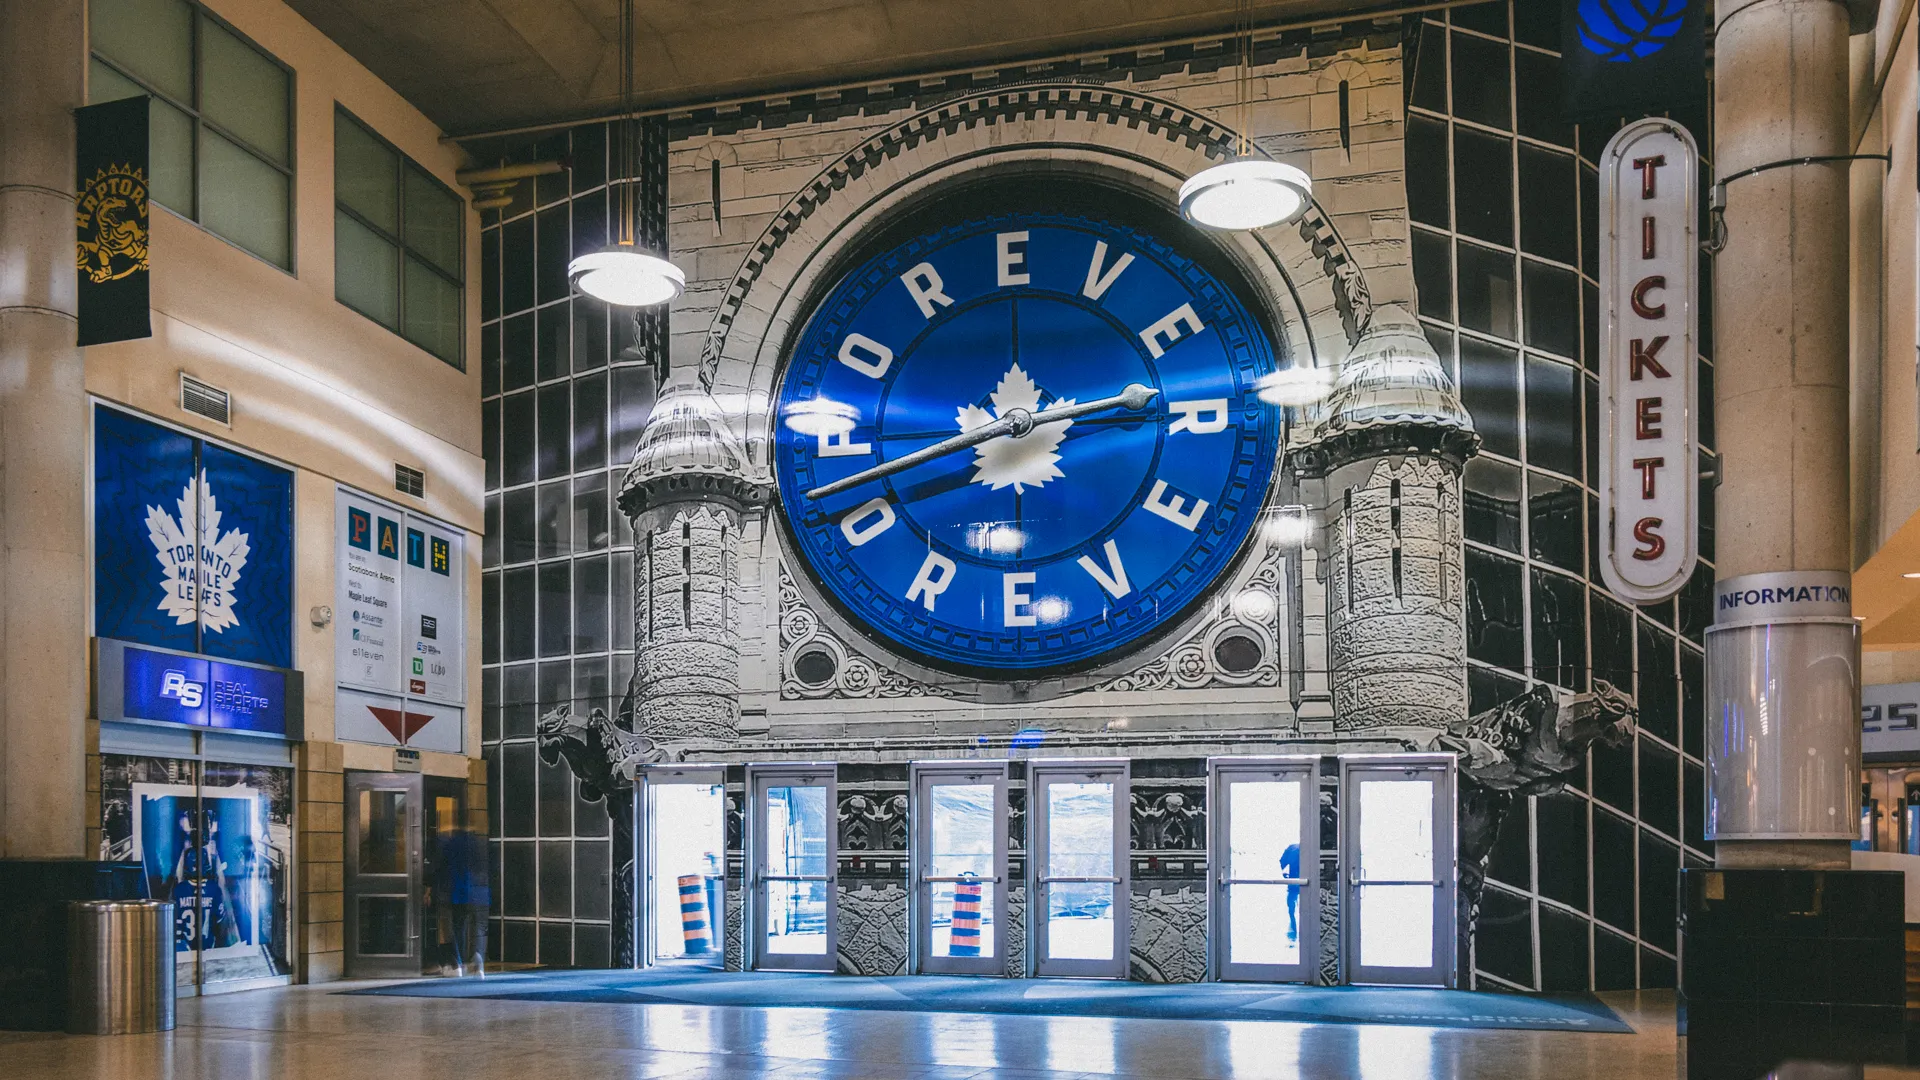 TORONTO, CANADA - October 4, 2019: Inside Scotiabank Arena Galleria - Toronto Maple Leafs logo surrounded by slogan "Leafs Forever" on a clock.